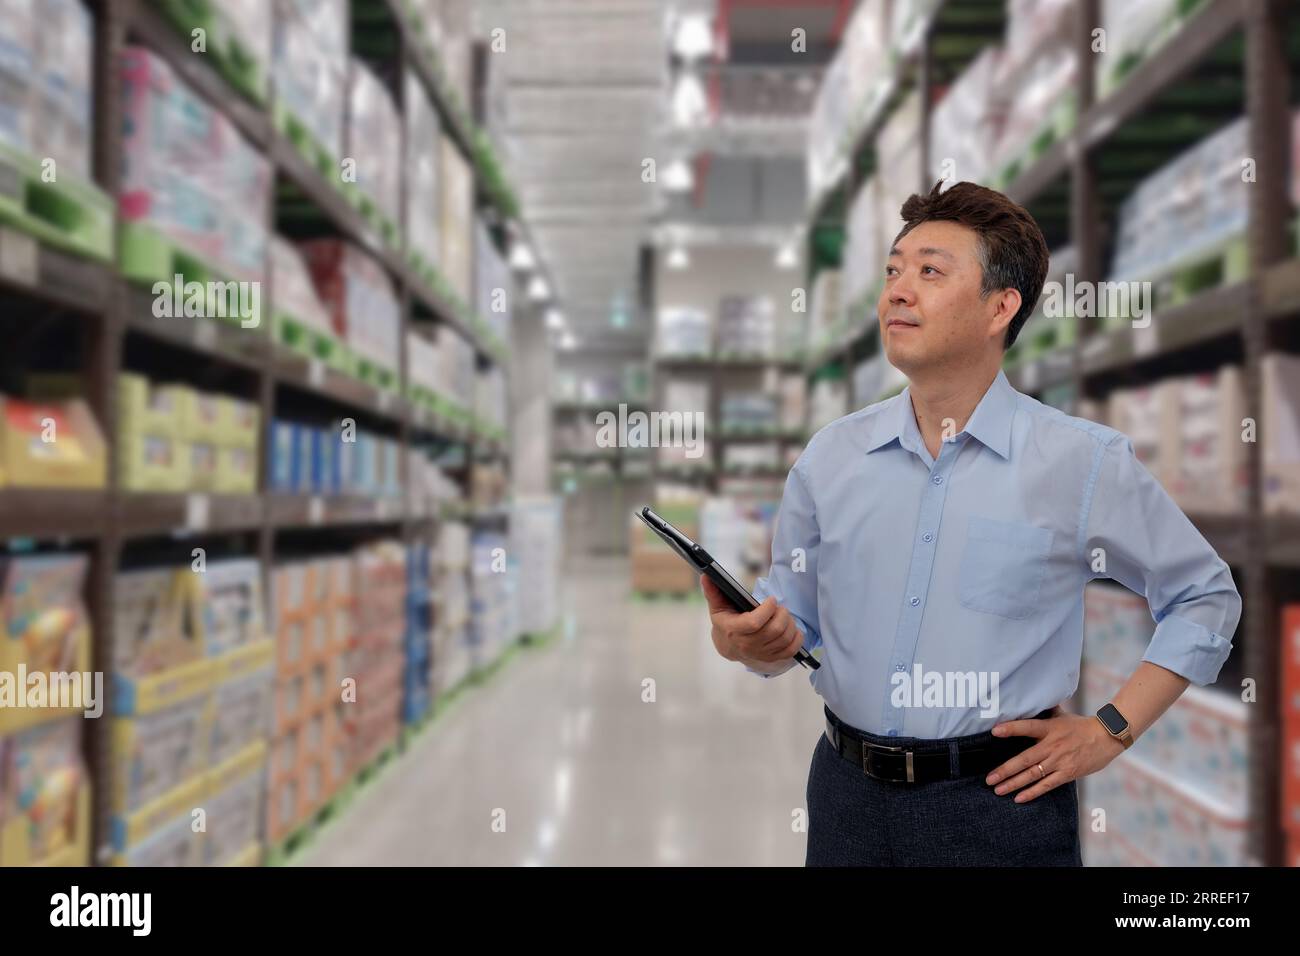 a middle-aged Asian businessman holding a tablet at a warehouse full of goods Stock Photo